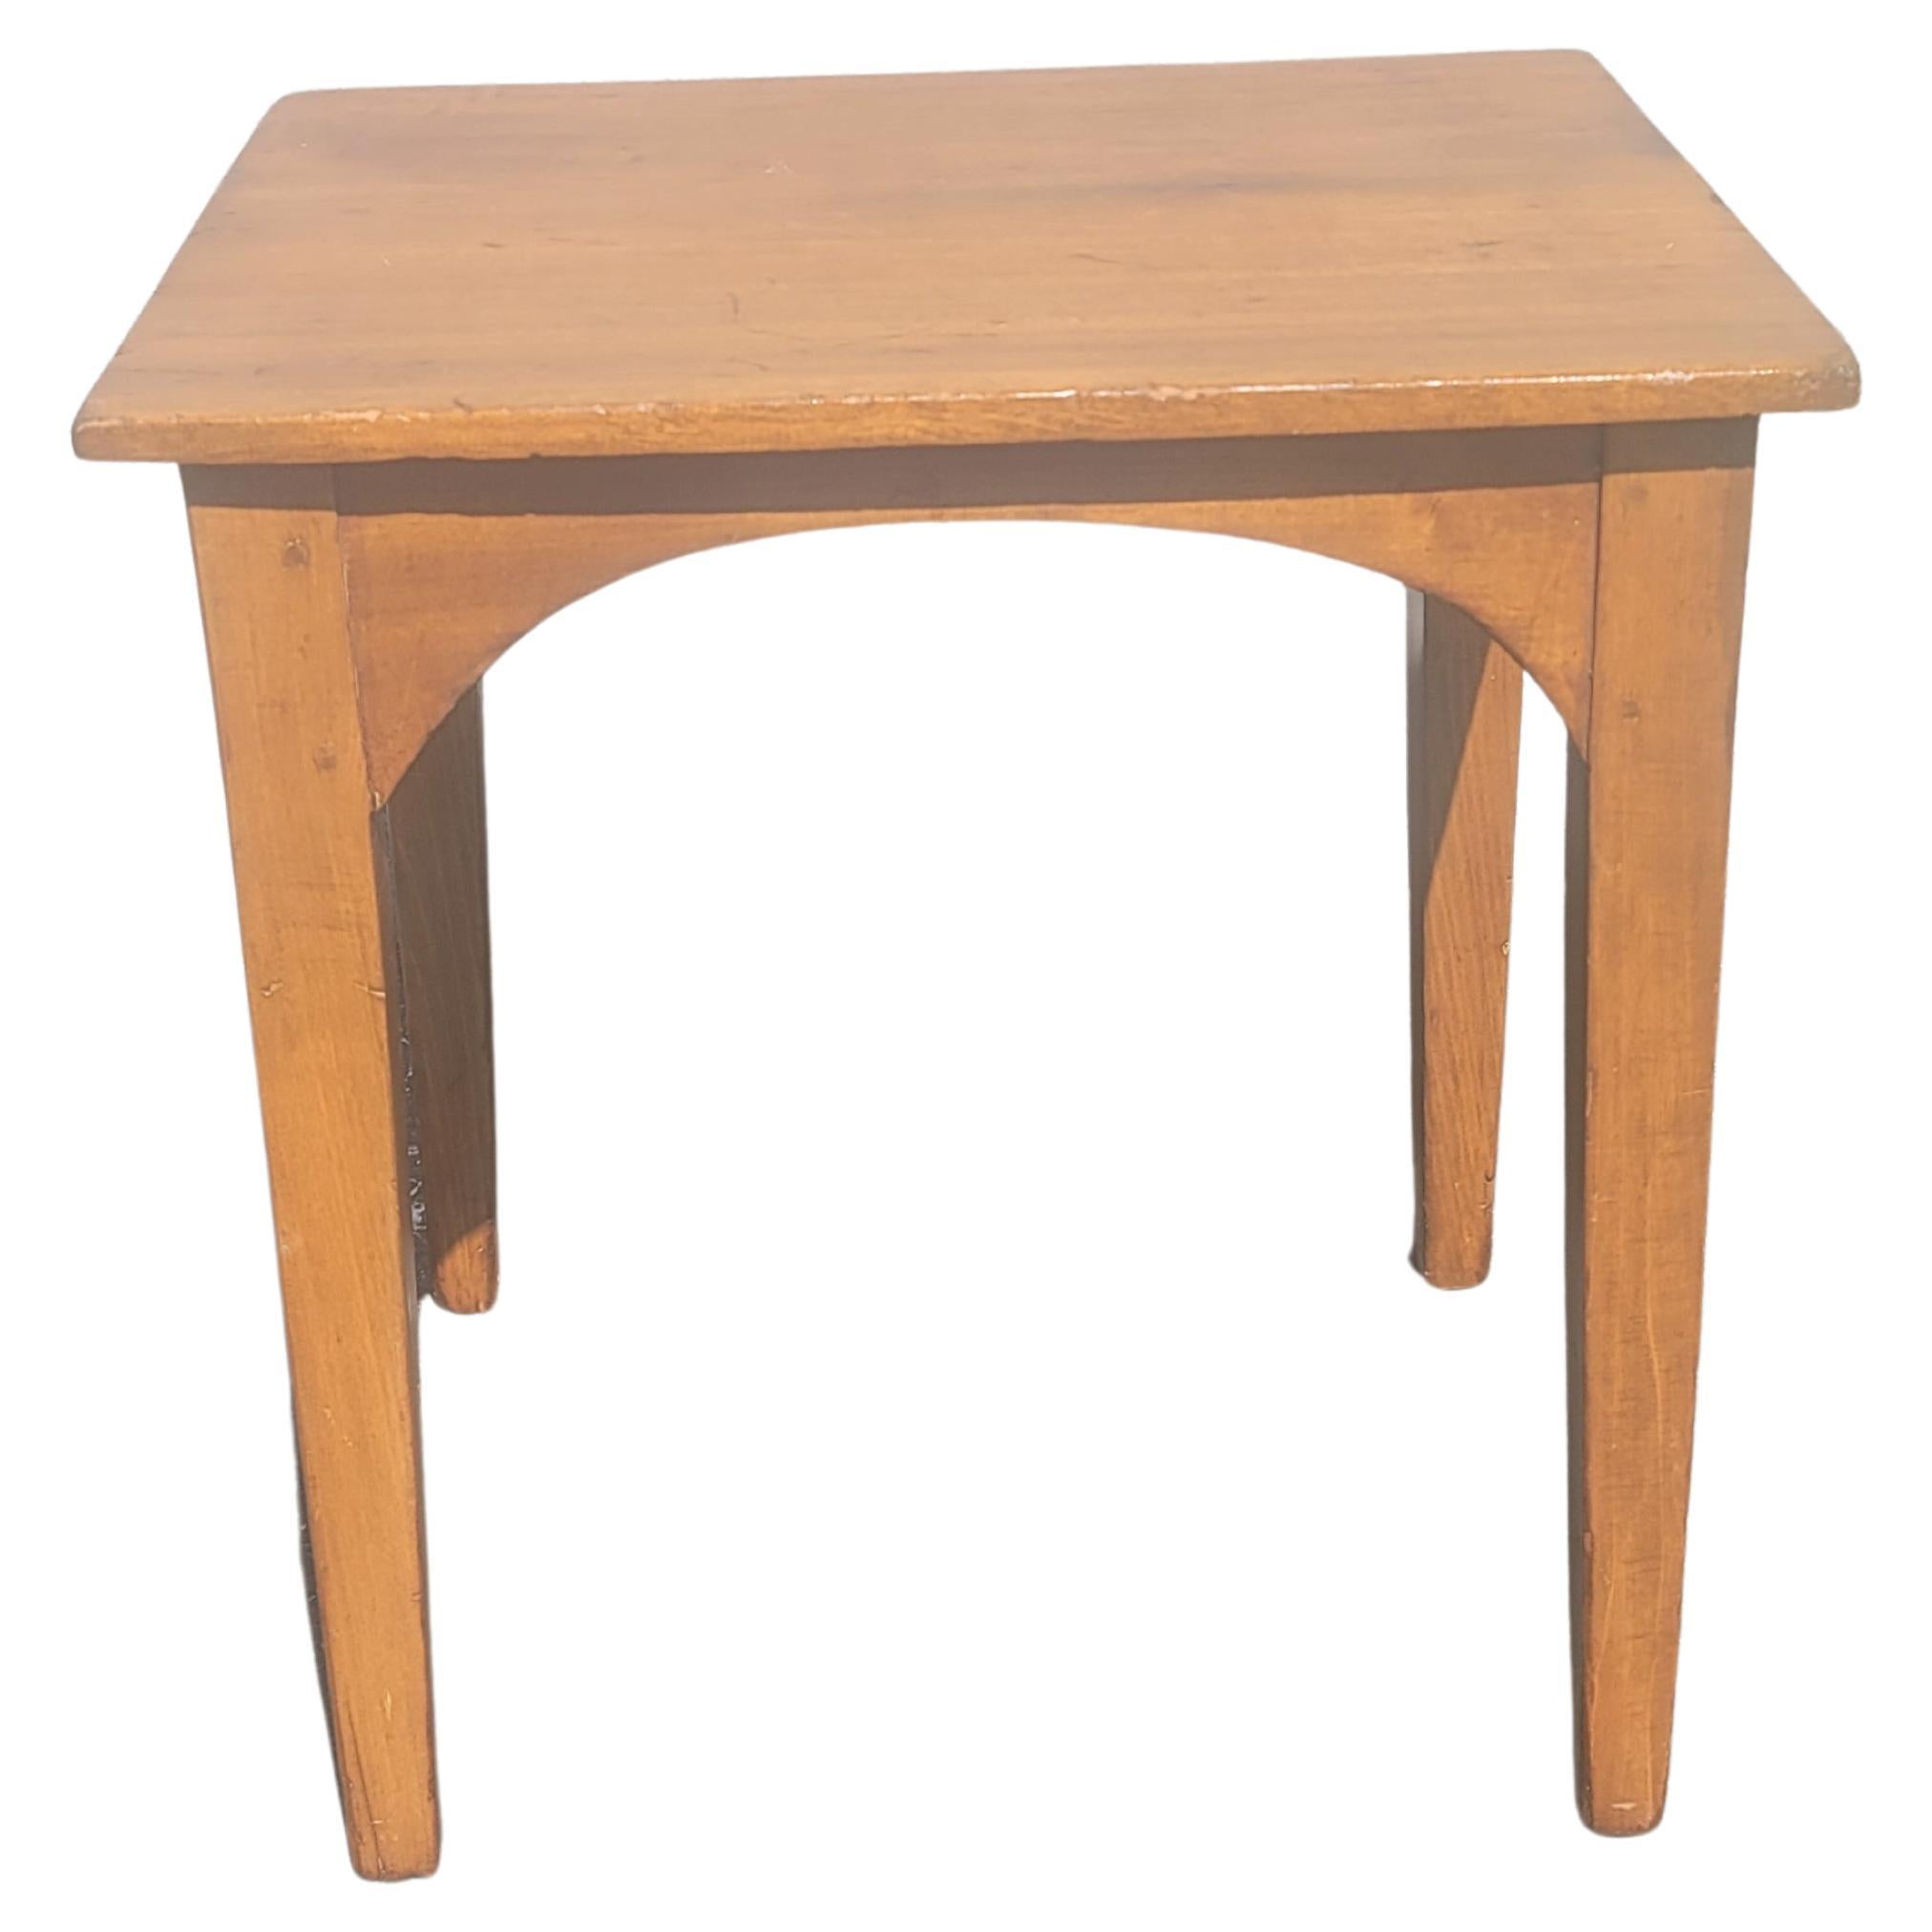 An early American handcrafted maple side table measuring 20